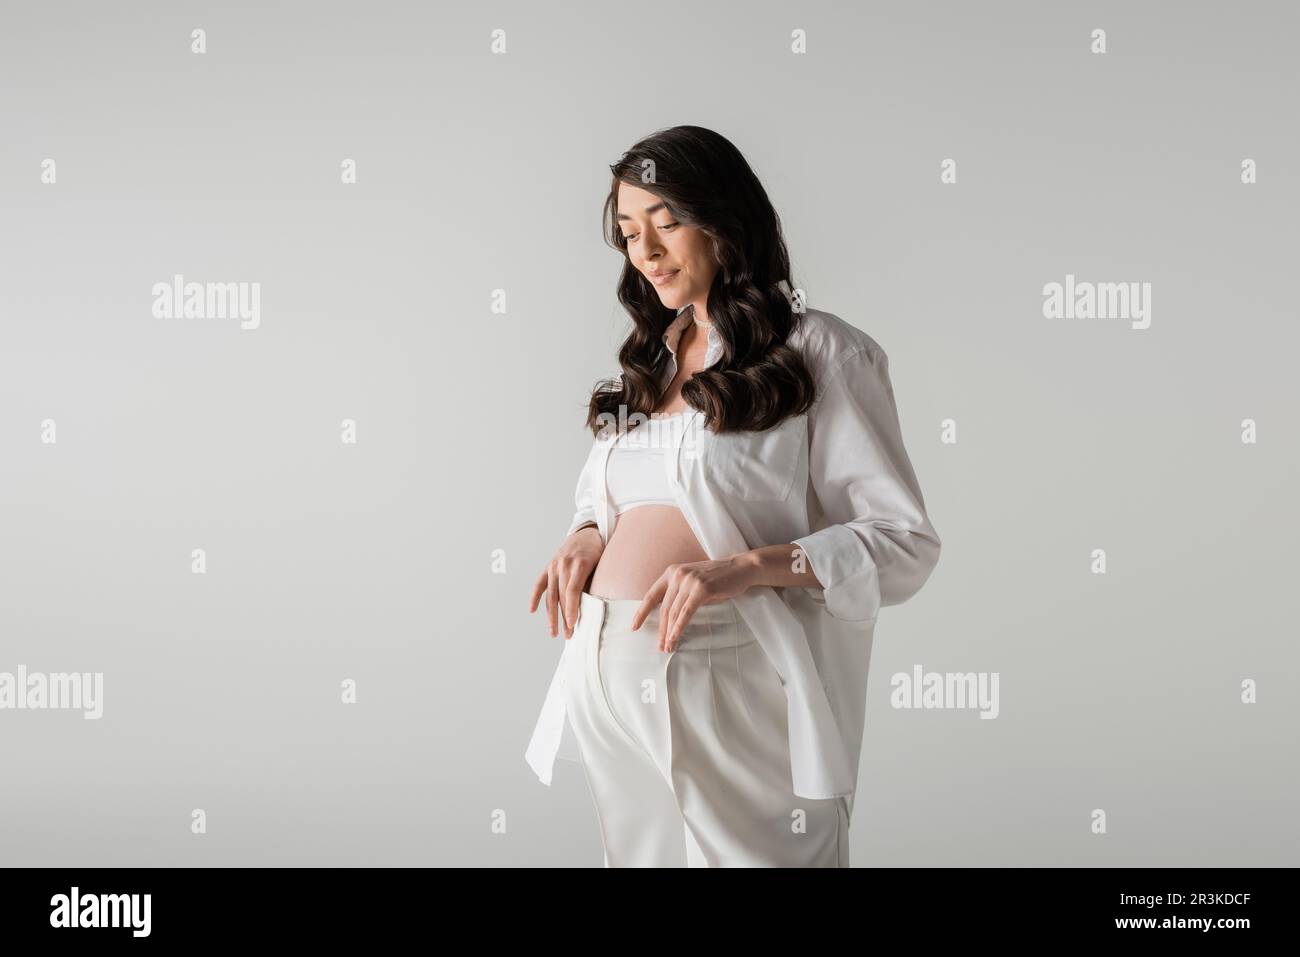 charming and happy pregnant woman with wavy brunette hair posing in white shirt, crop top and pants while smiling isolated on grey background, materni Stock Photo